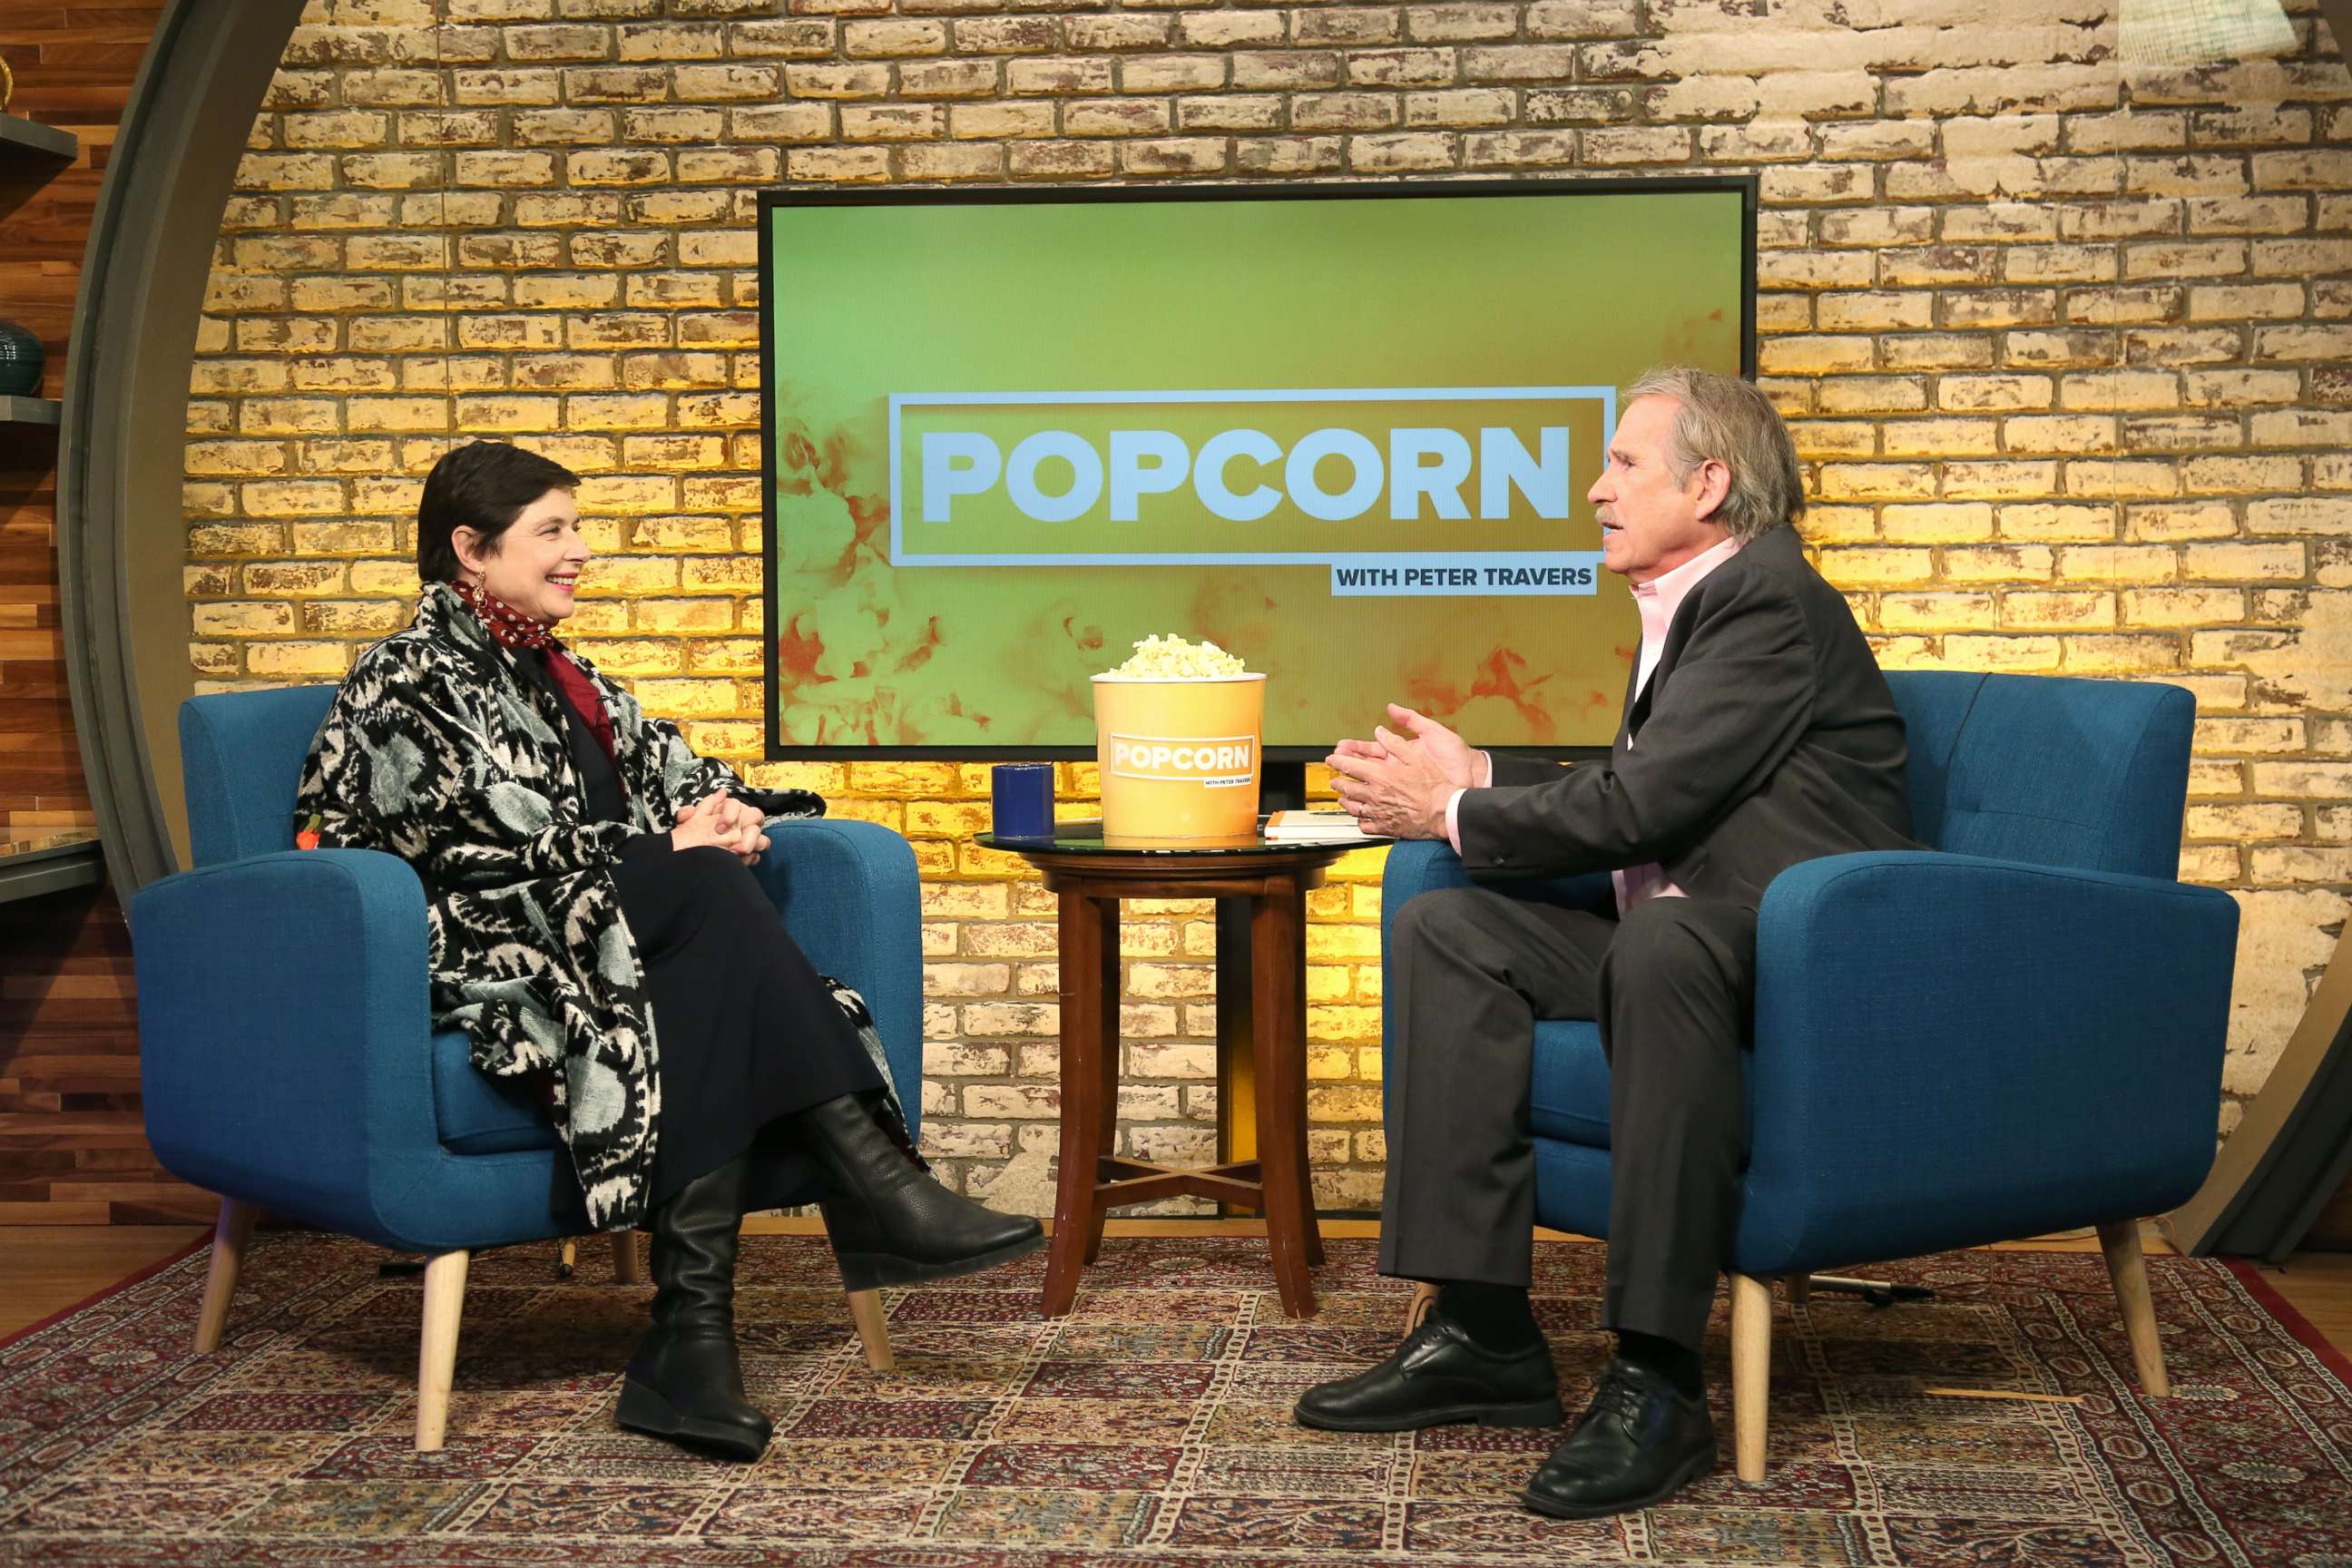 PHOTO: Isabella Rossellini on "Popcorn with Peter Travers" in New York City, March 28, 2018.